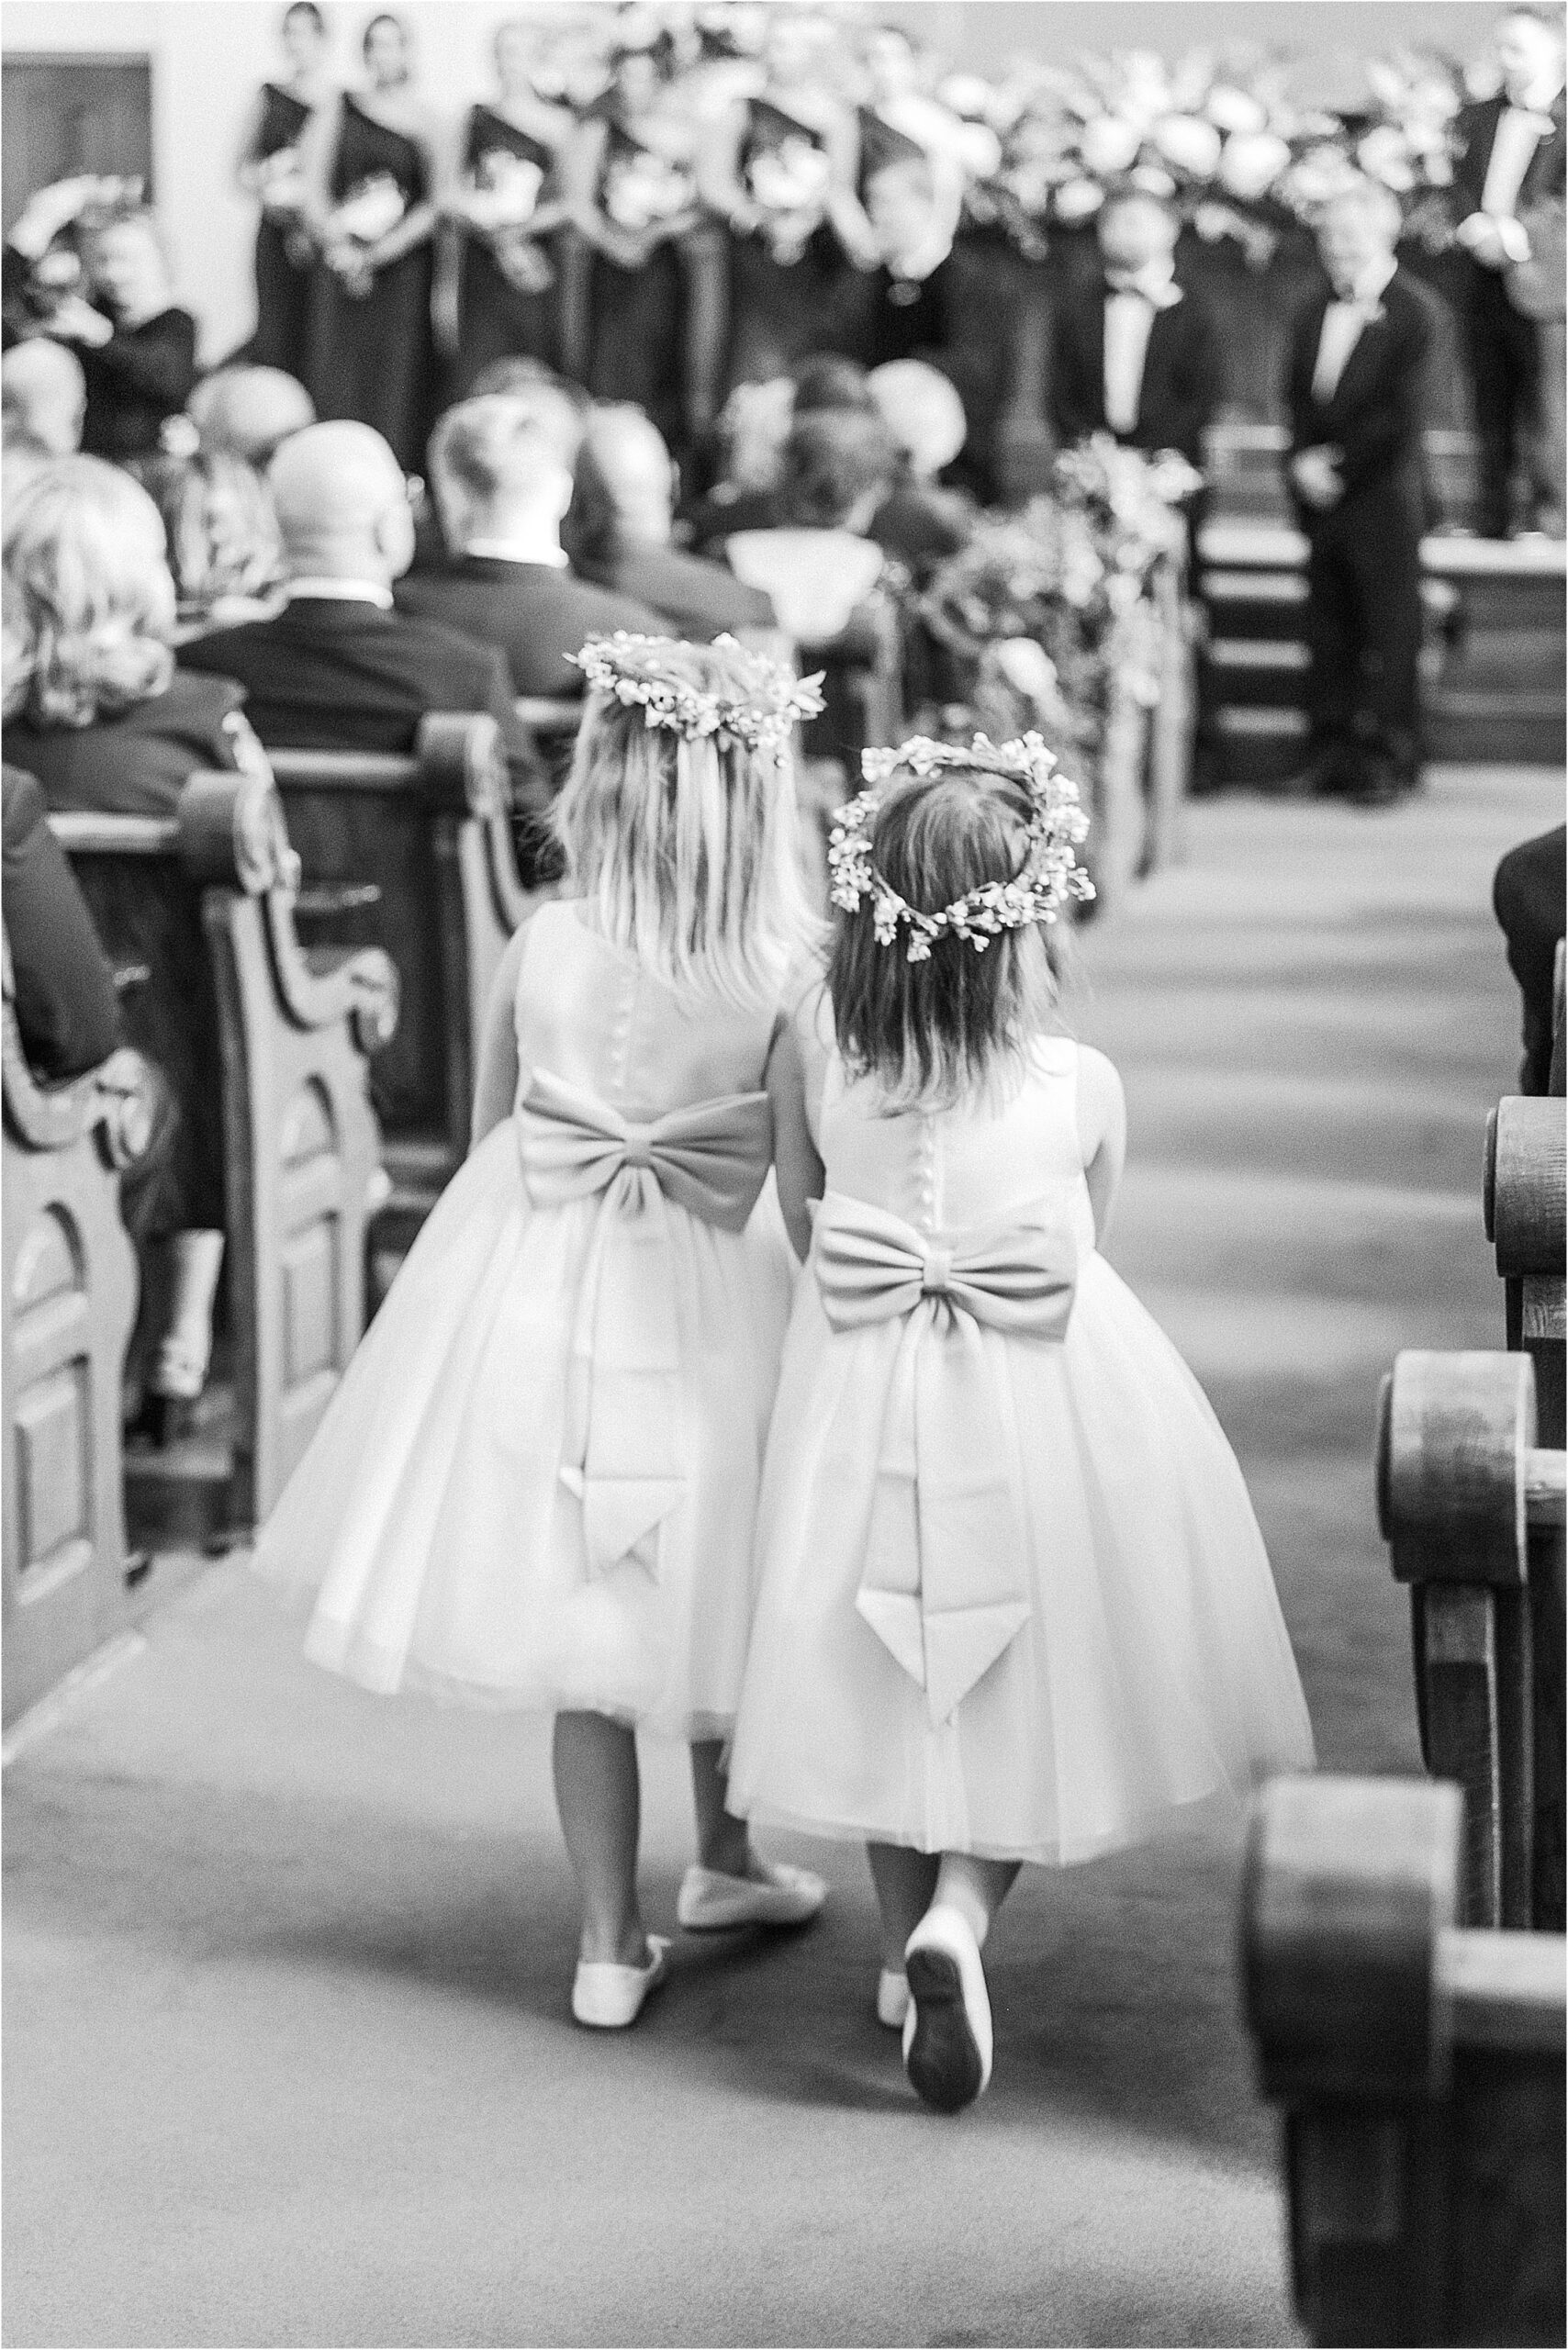 Black and white image of flower girls walking down the aisle of church. 